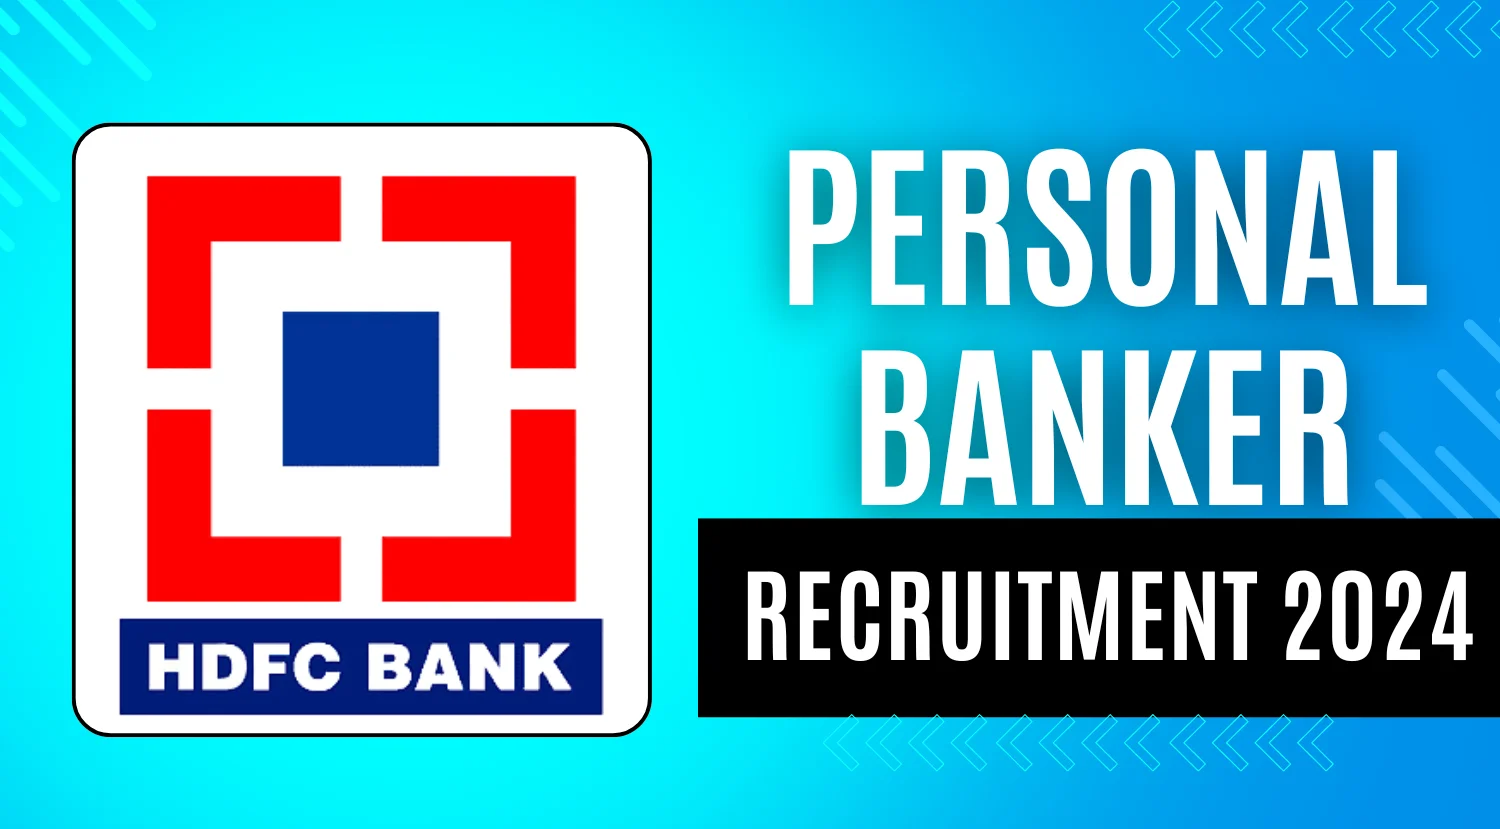 HDFC Recruitment 2024, Check HDFC Bank Future Bankers 2.0 Program to Recruit Personal Banker-Sales